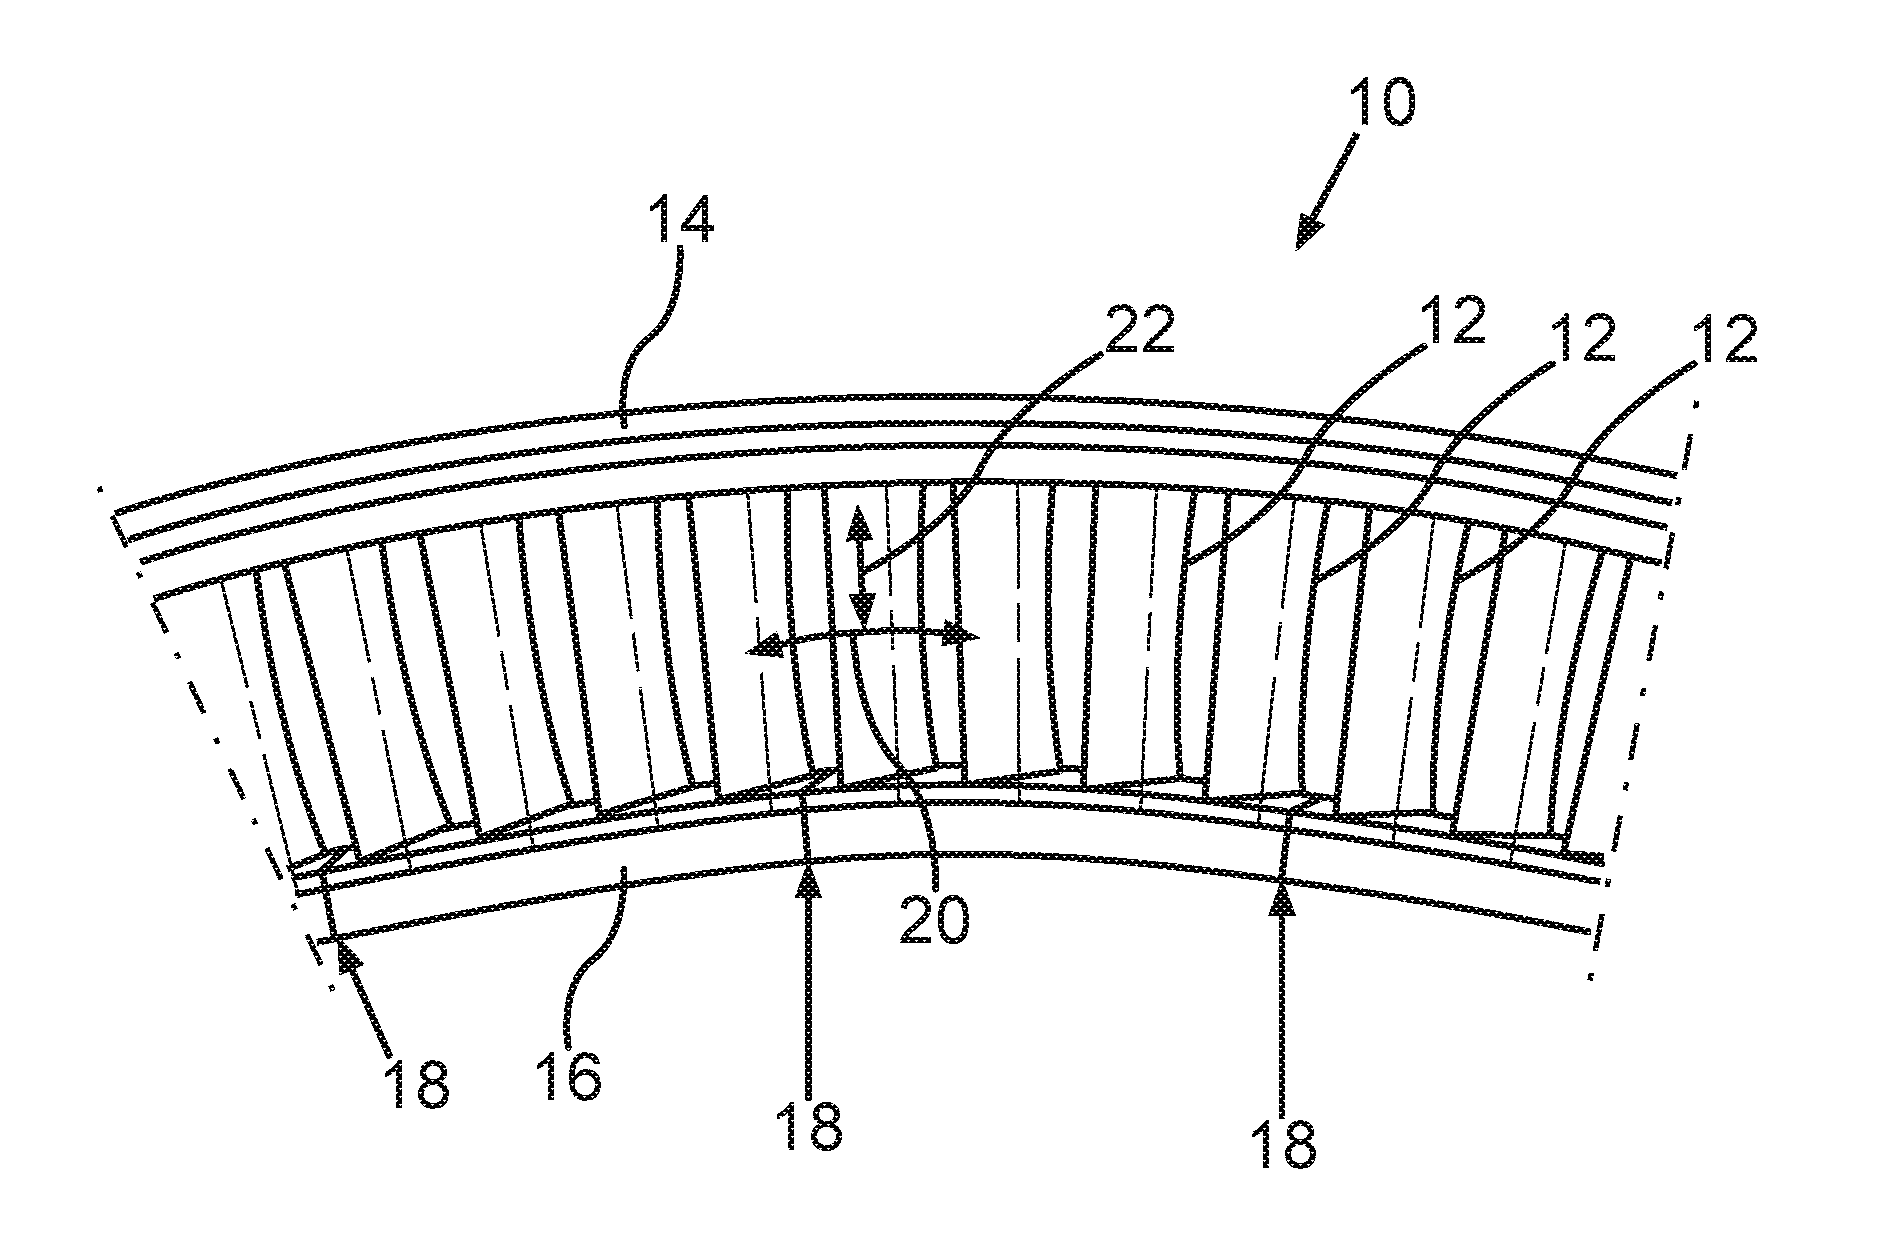 Guide vane ring for a turbomachine